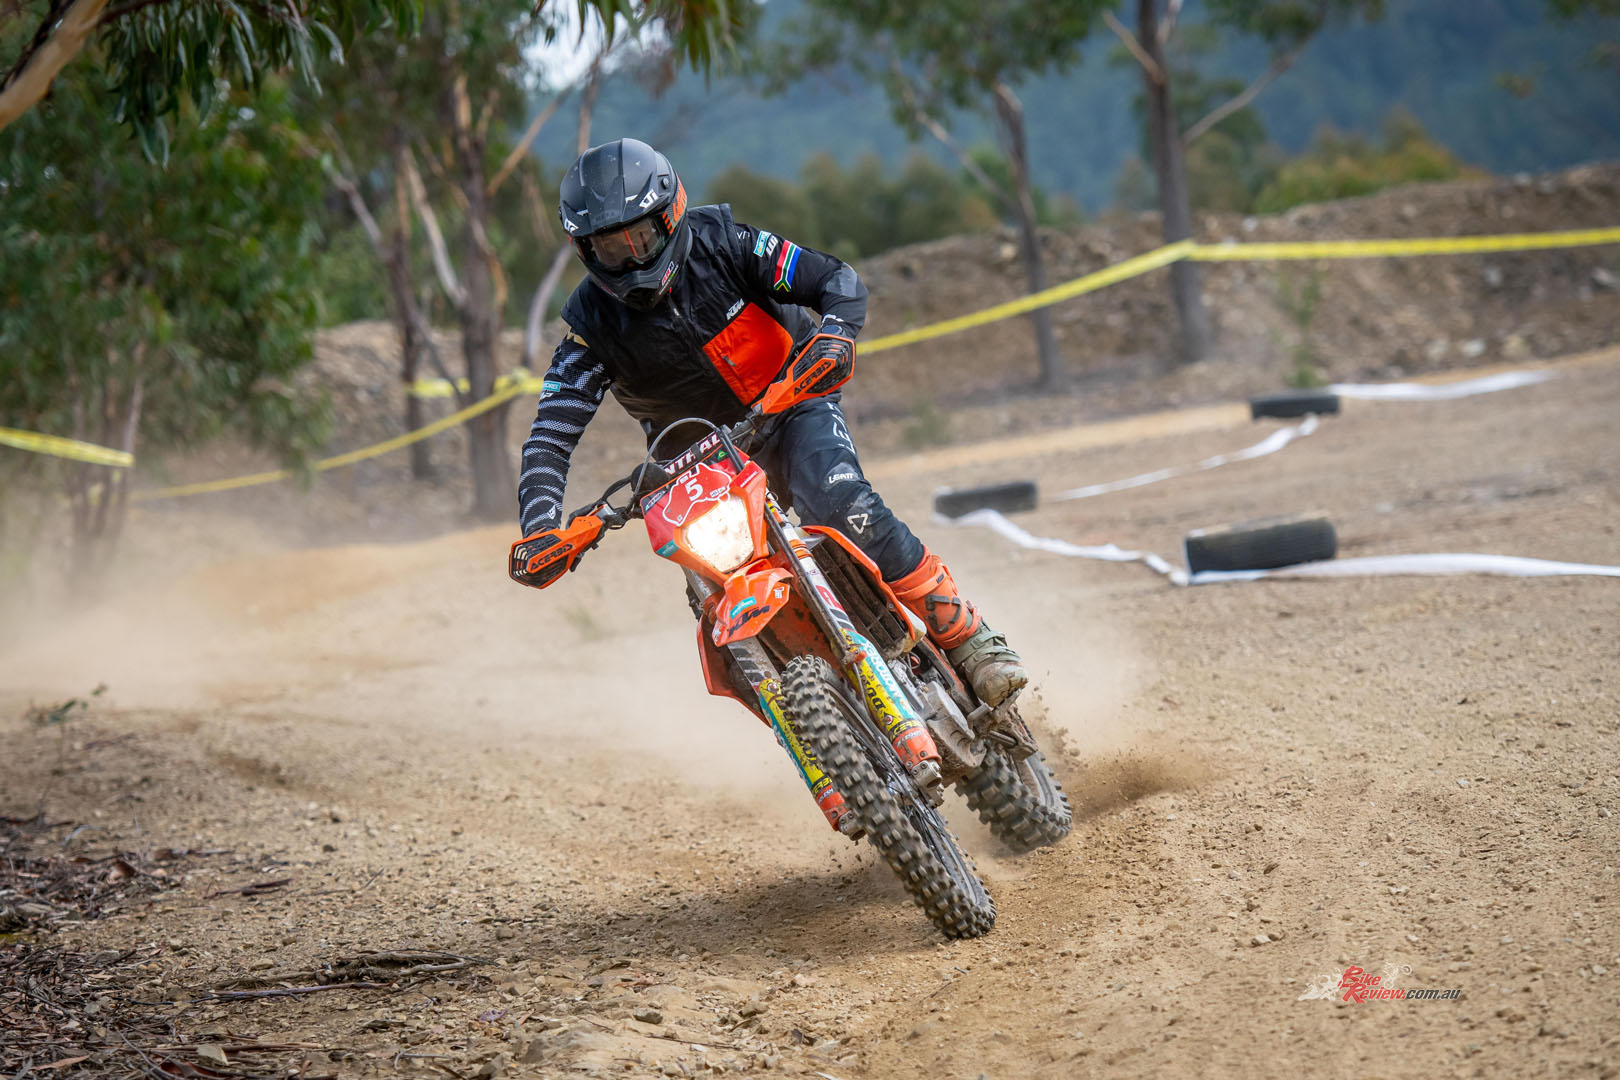 Claiming first place on day one after navigating Erica’s tough conditions was KTM’s Granquist, with a time of 24:51.358.